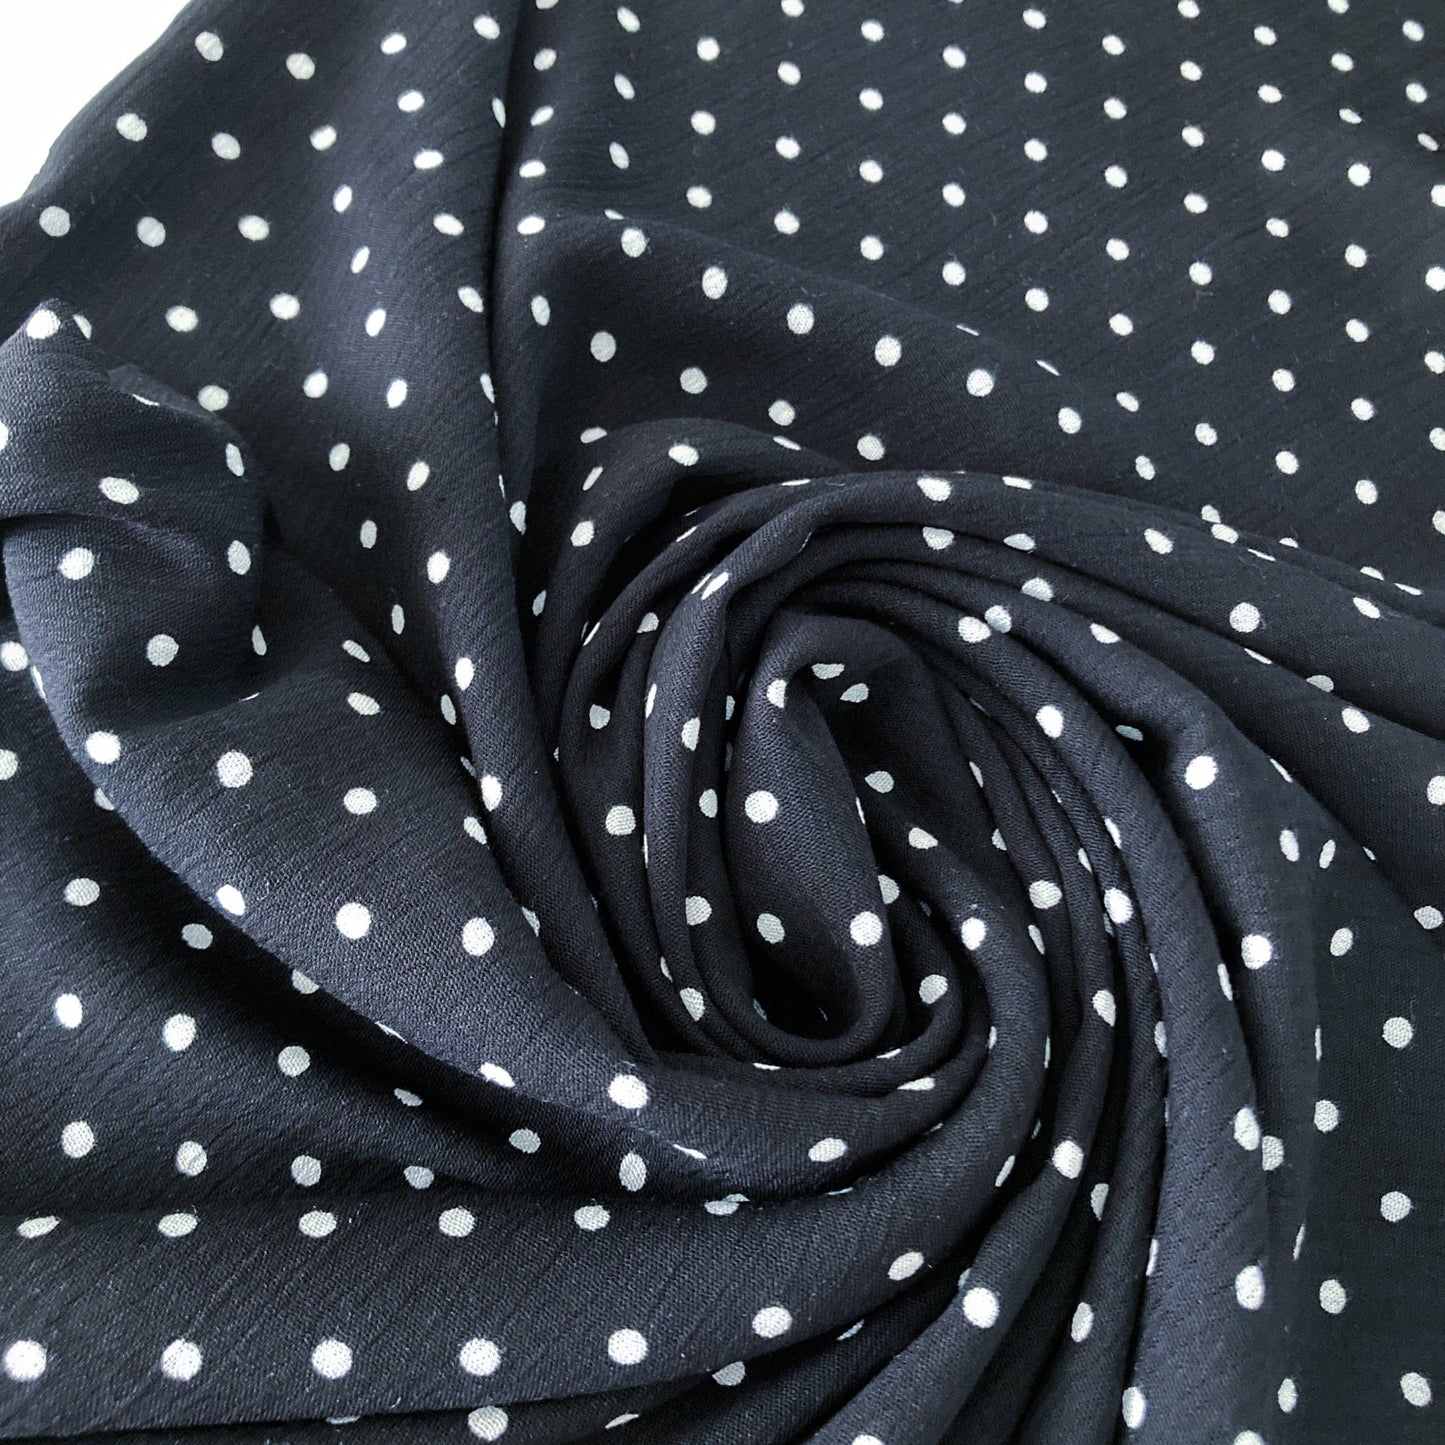 Soft Crinkle Viscose in Black with White Polka Dots